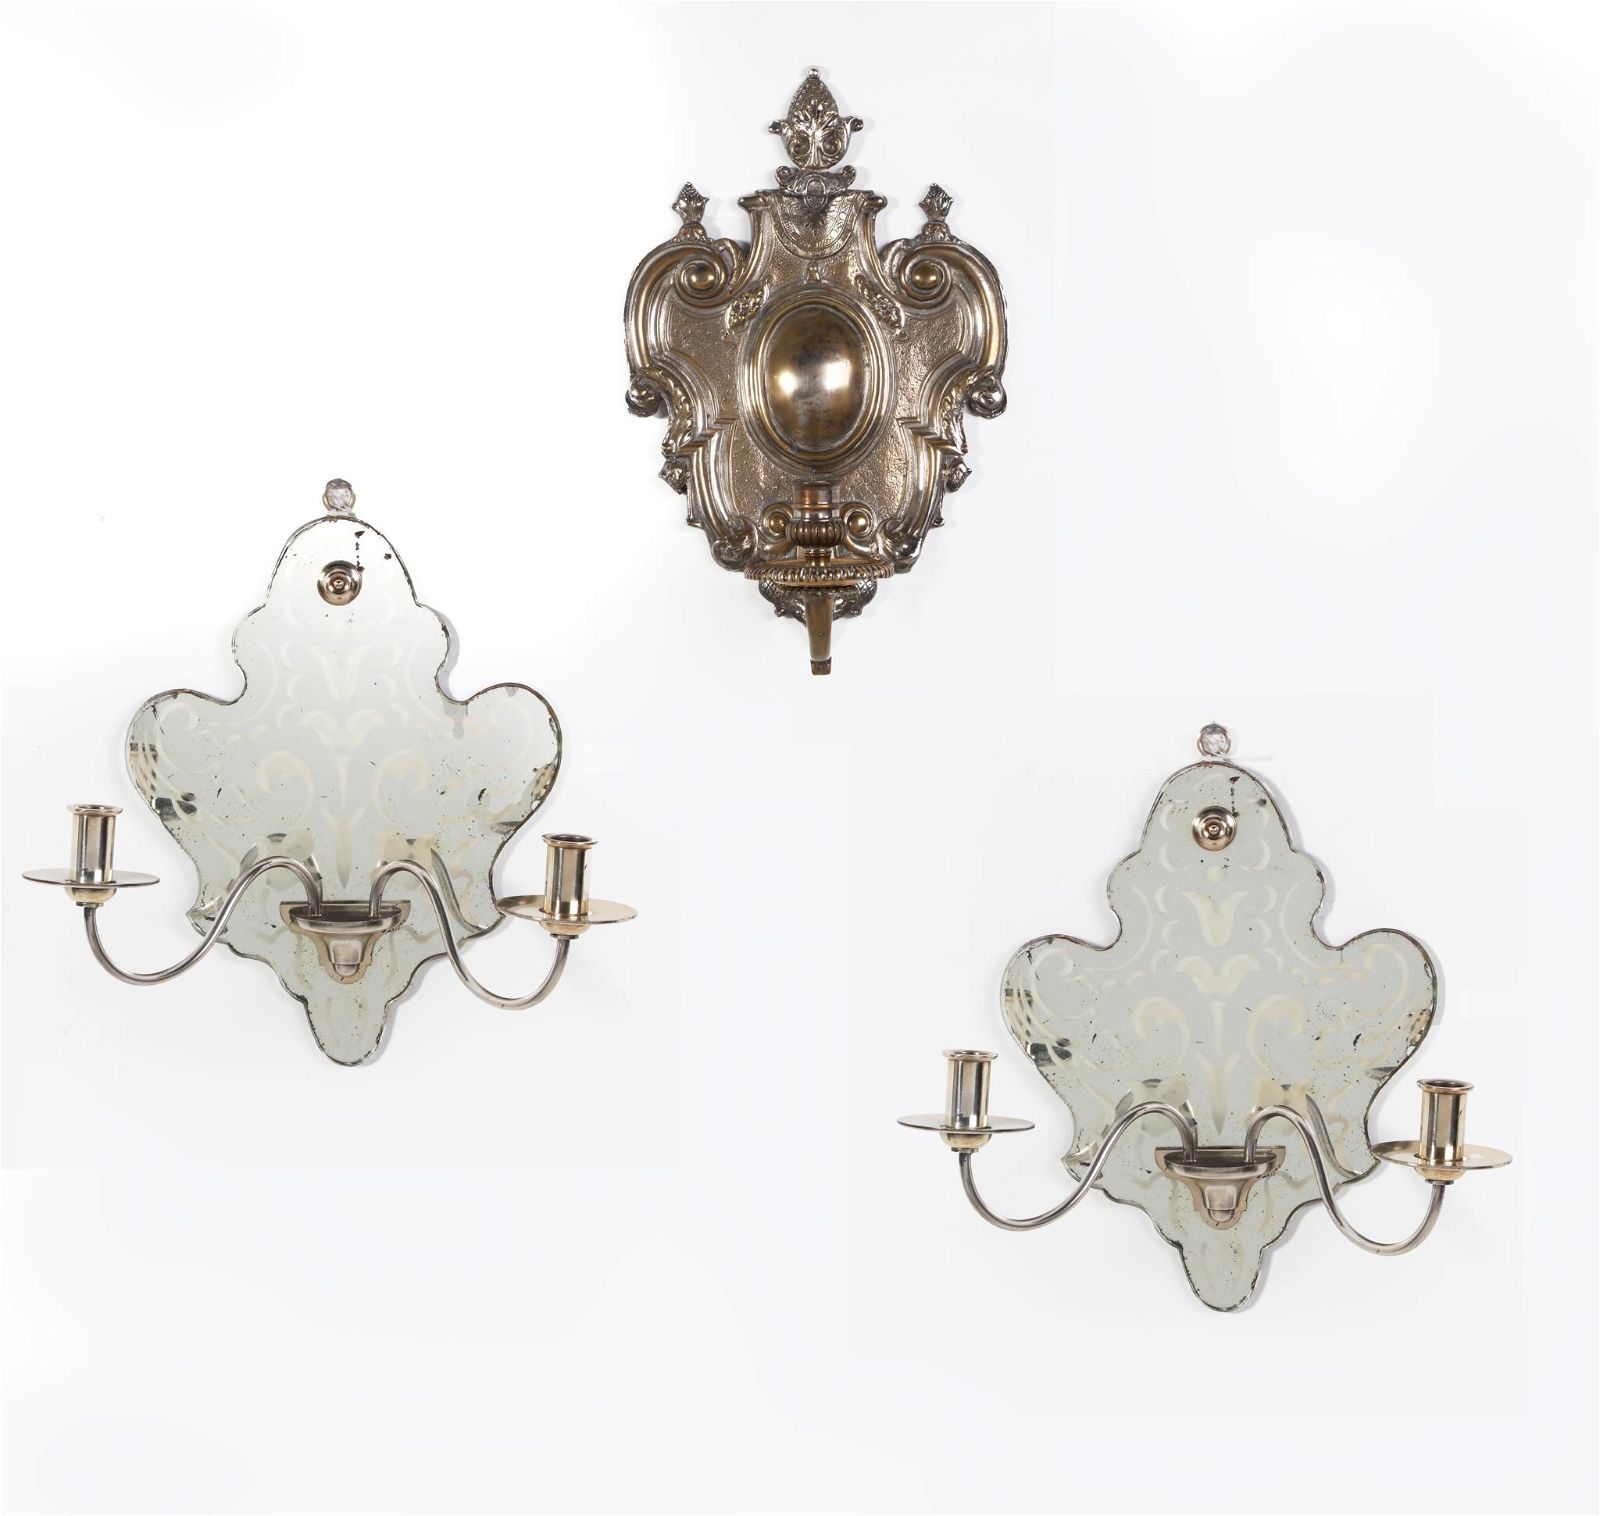 A PAIR OF BAROQUE STYLE WALL LIGHTS 2fb27b2